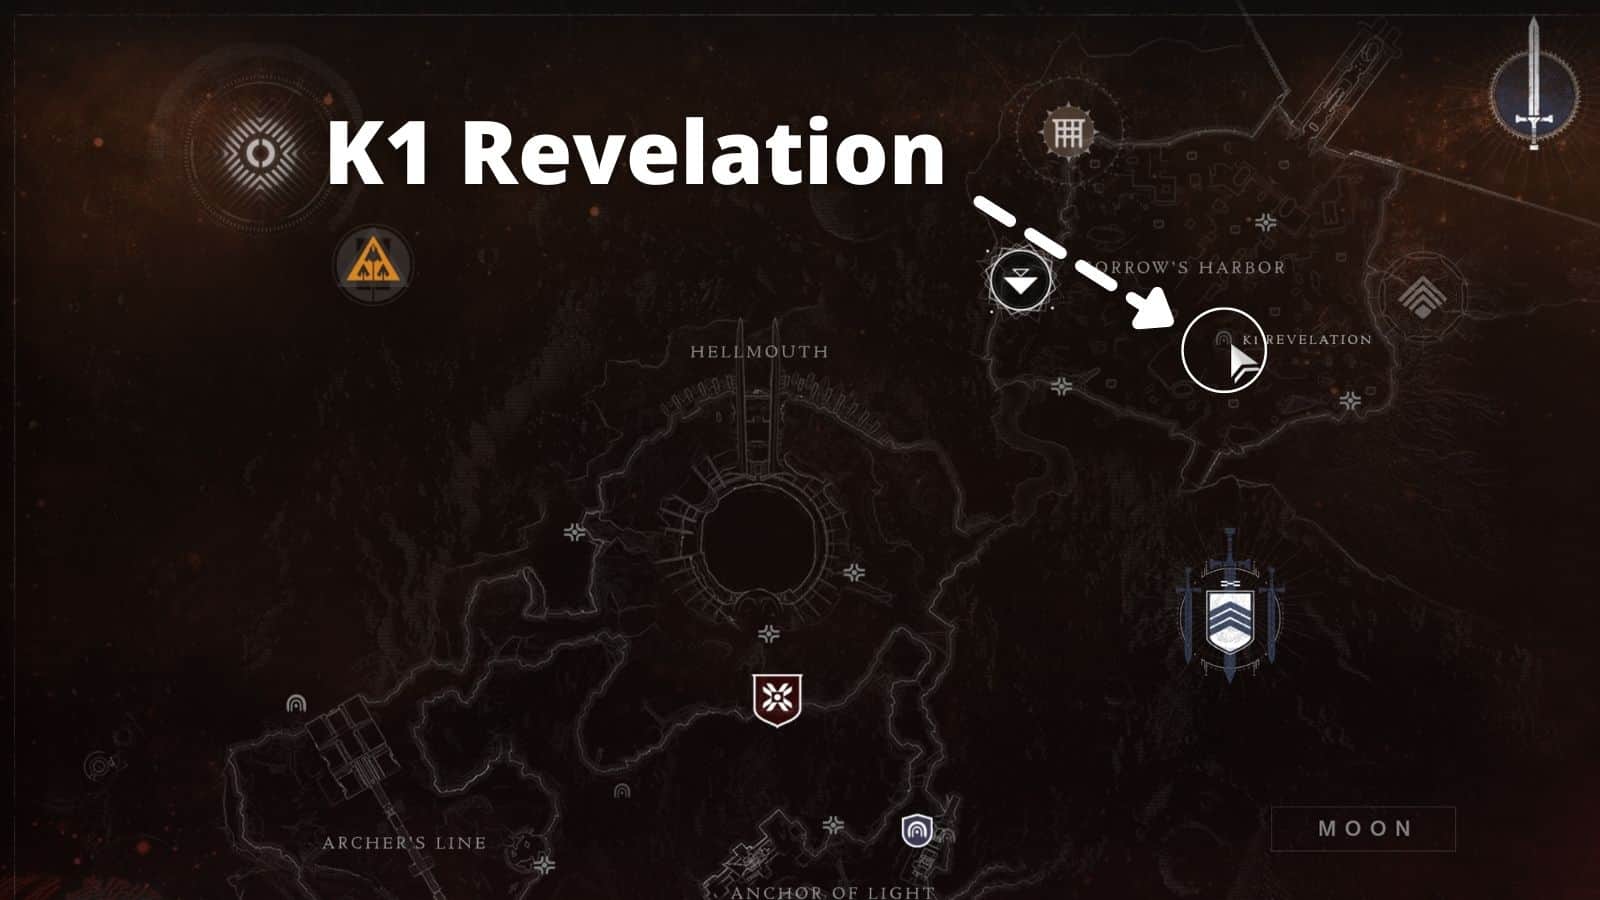 K1 Revelation Lost Sector location Destiny 2 featured